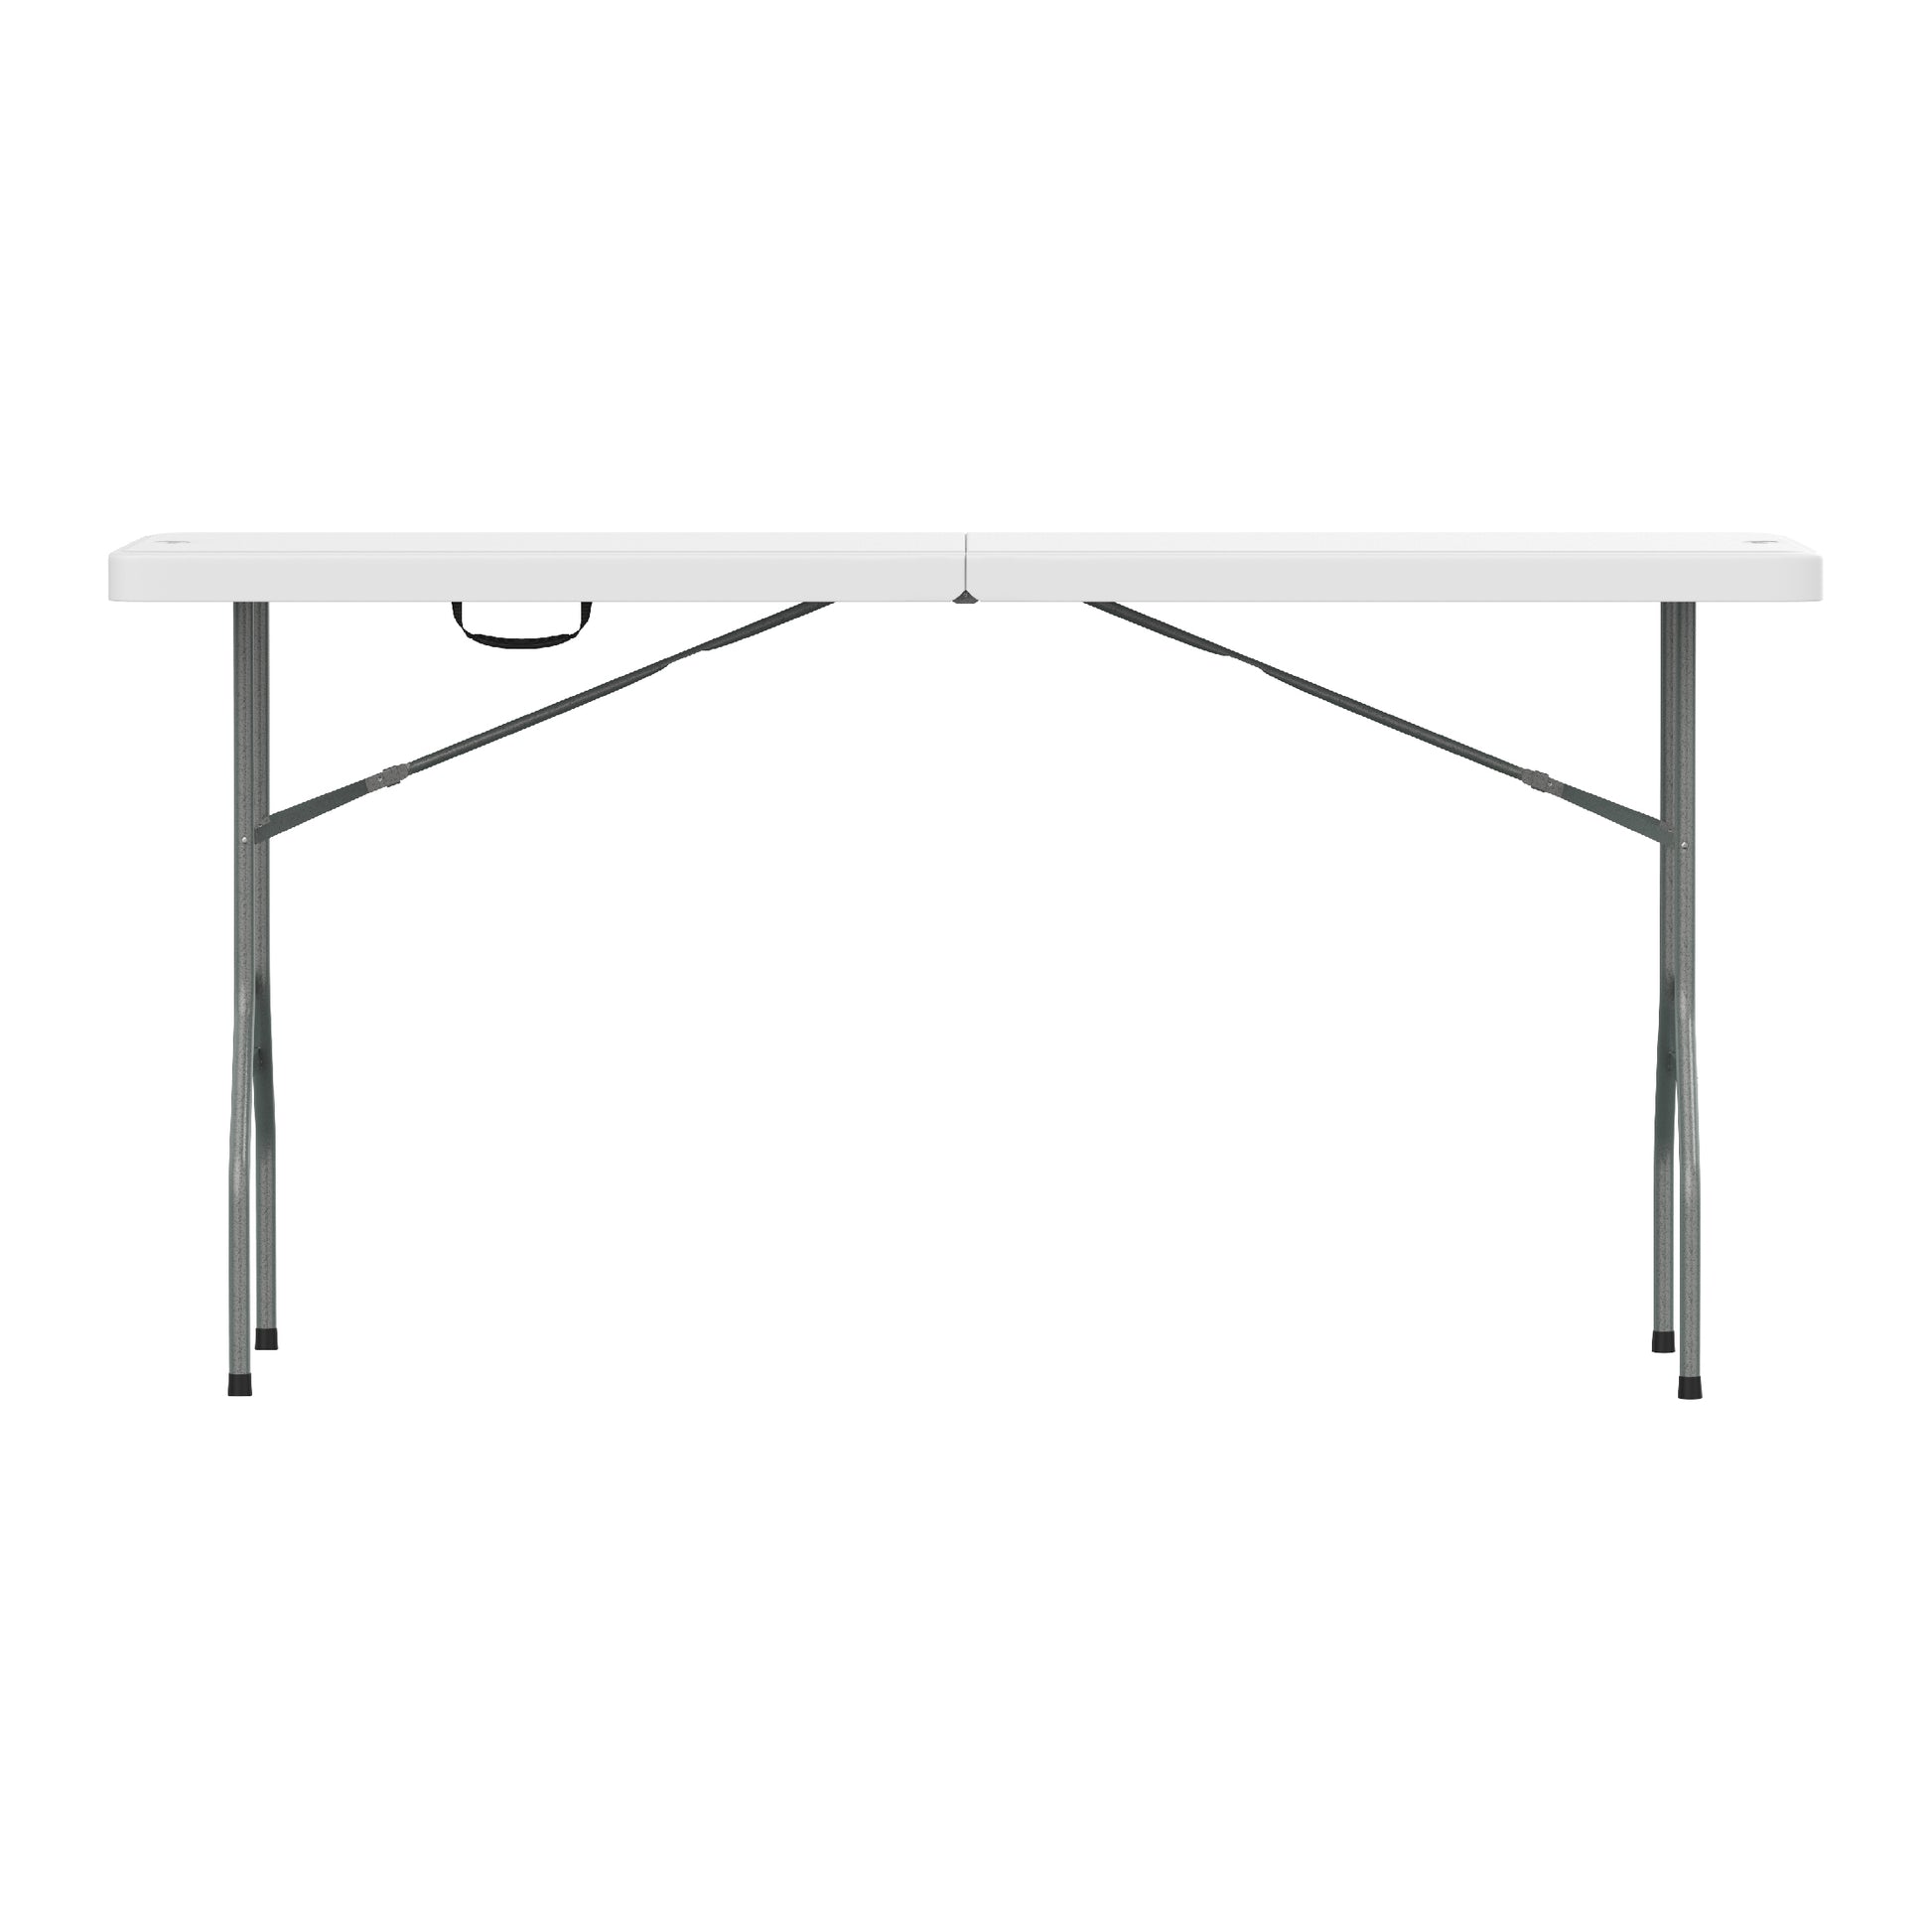 180 cm Folding Picnic Table with Steel Legs